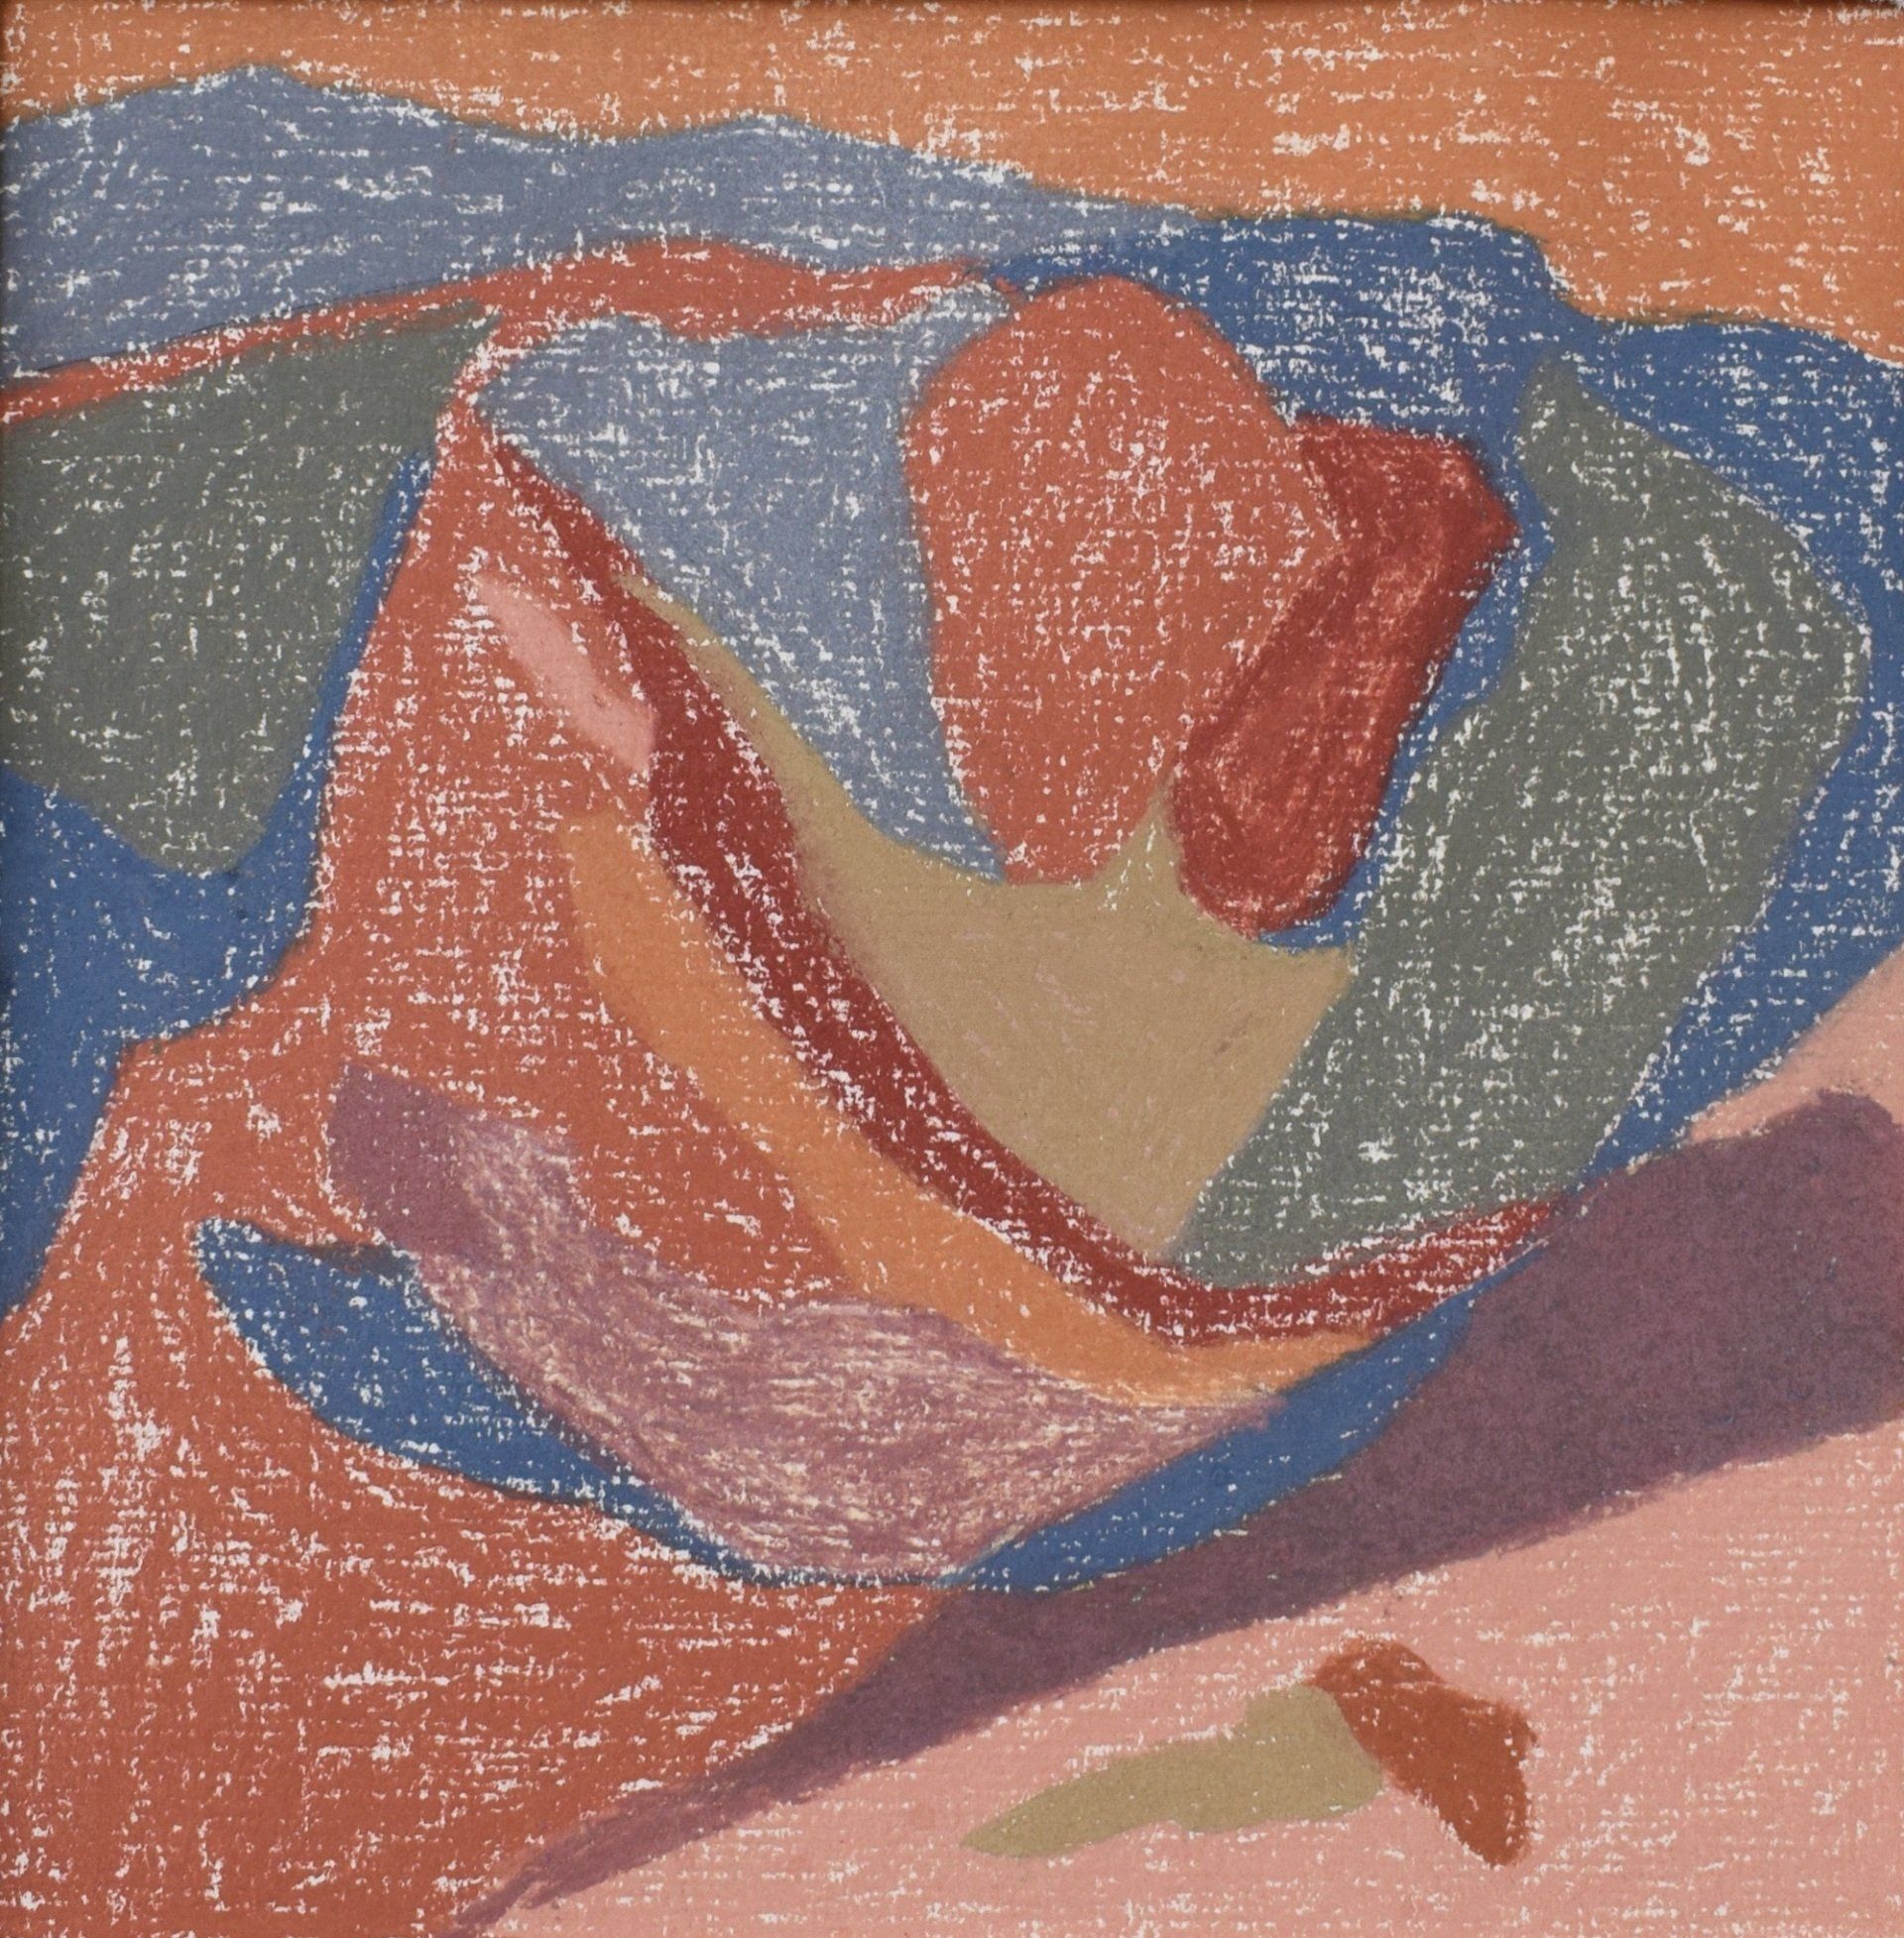 Drawing with abstract landscape forms in pink, orange, blue and green.